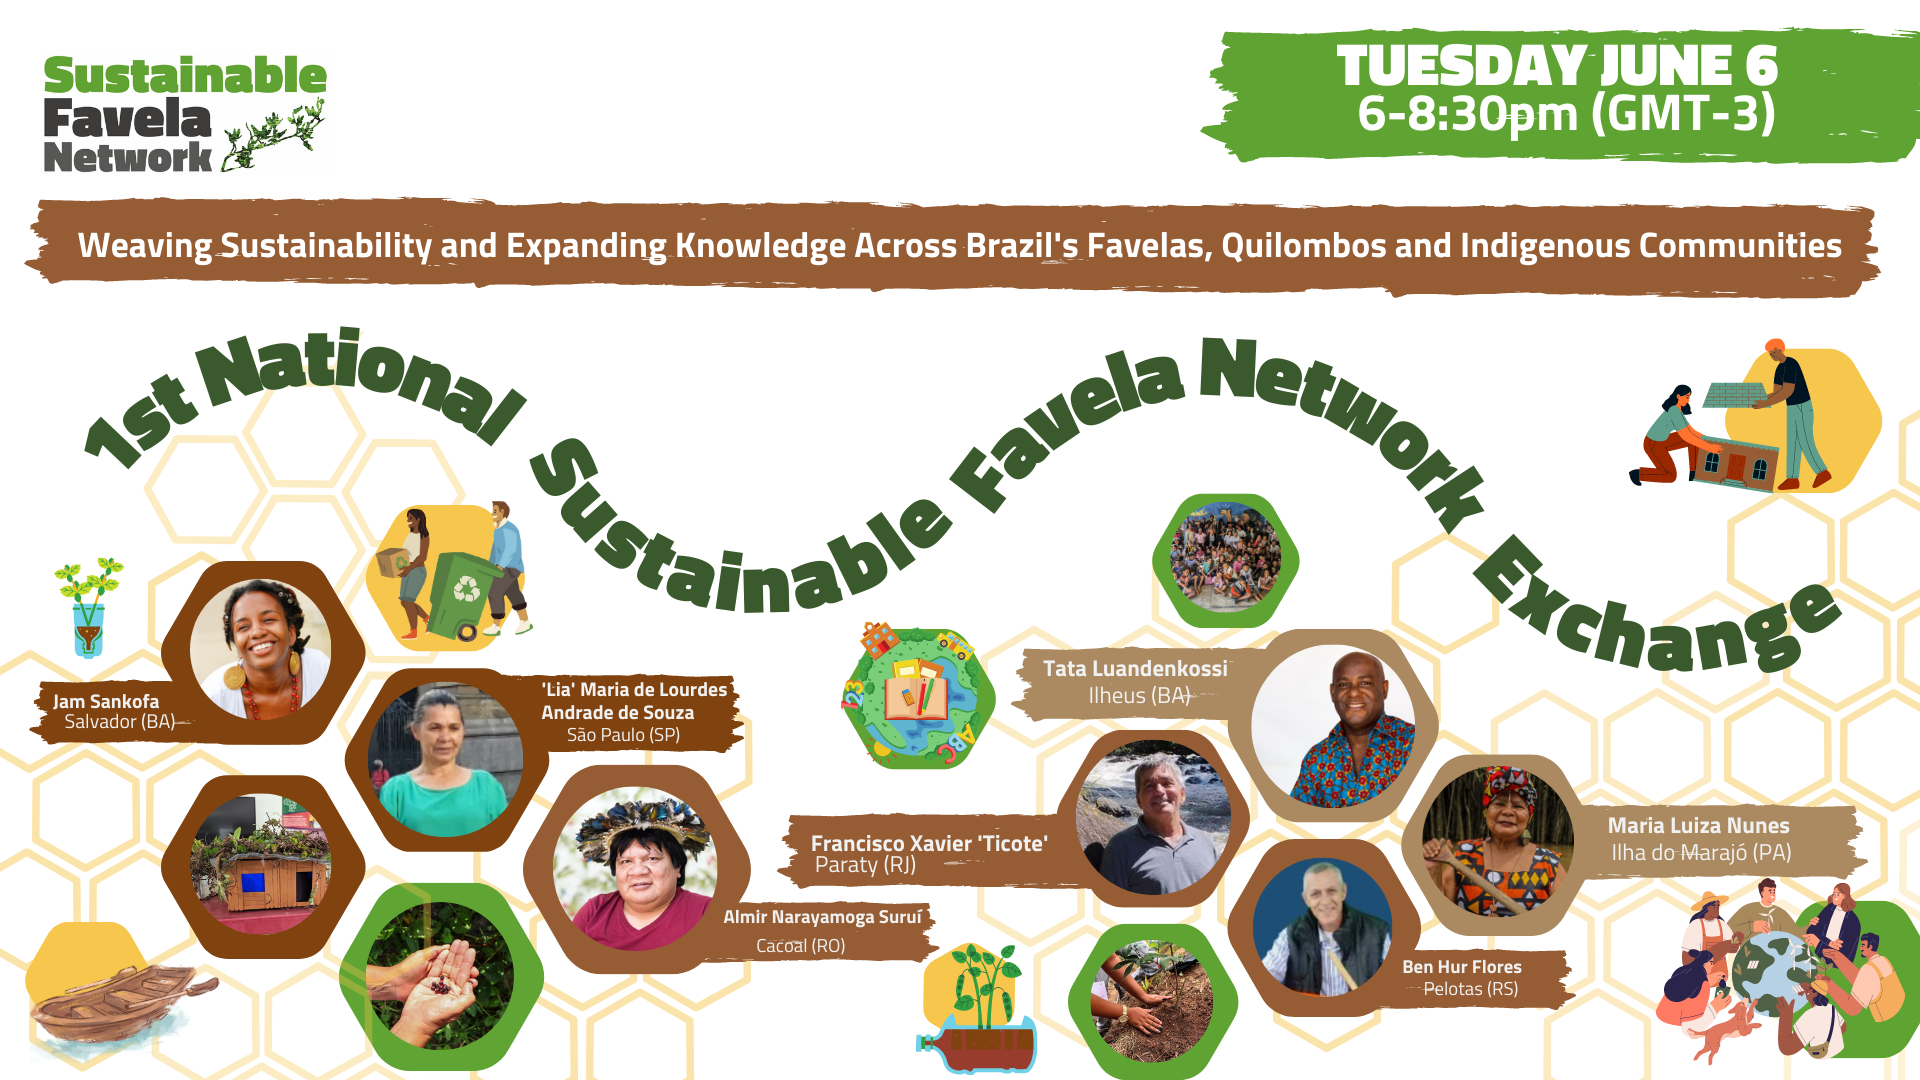 1st National Sustainable Favela Network Exchange Expands Knowledge and Weaves Sustainability Between Favelas, Quilombos, and Indigenous Communities.